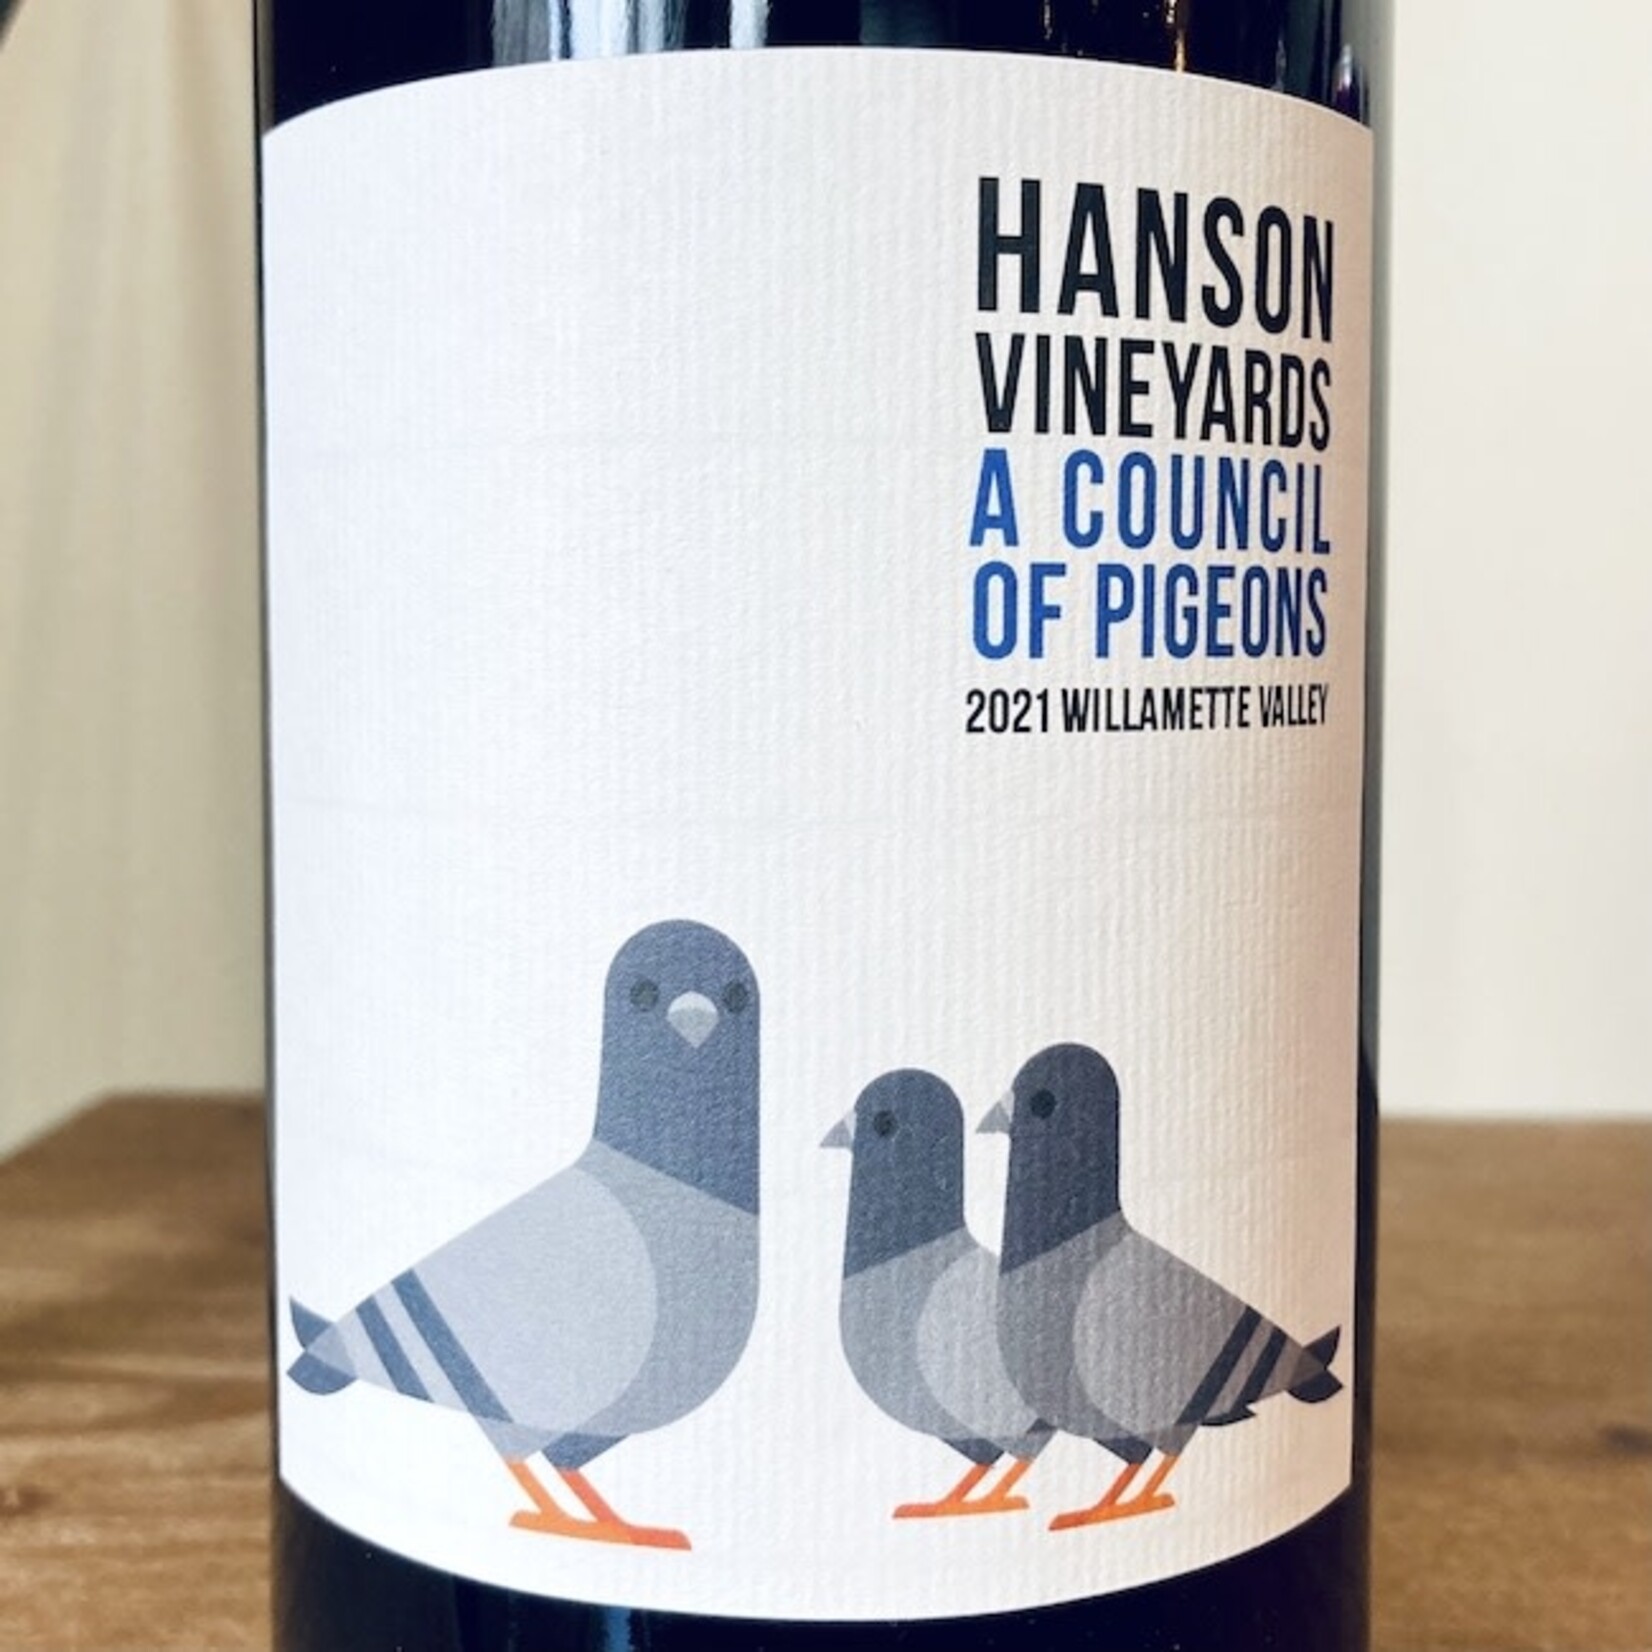 USA 2021 Hanson Vineyards Willamette Valley "A Council of Pigeons"